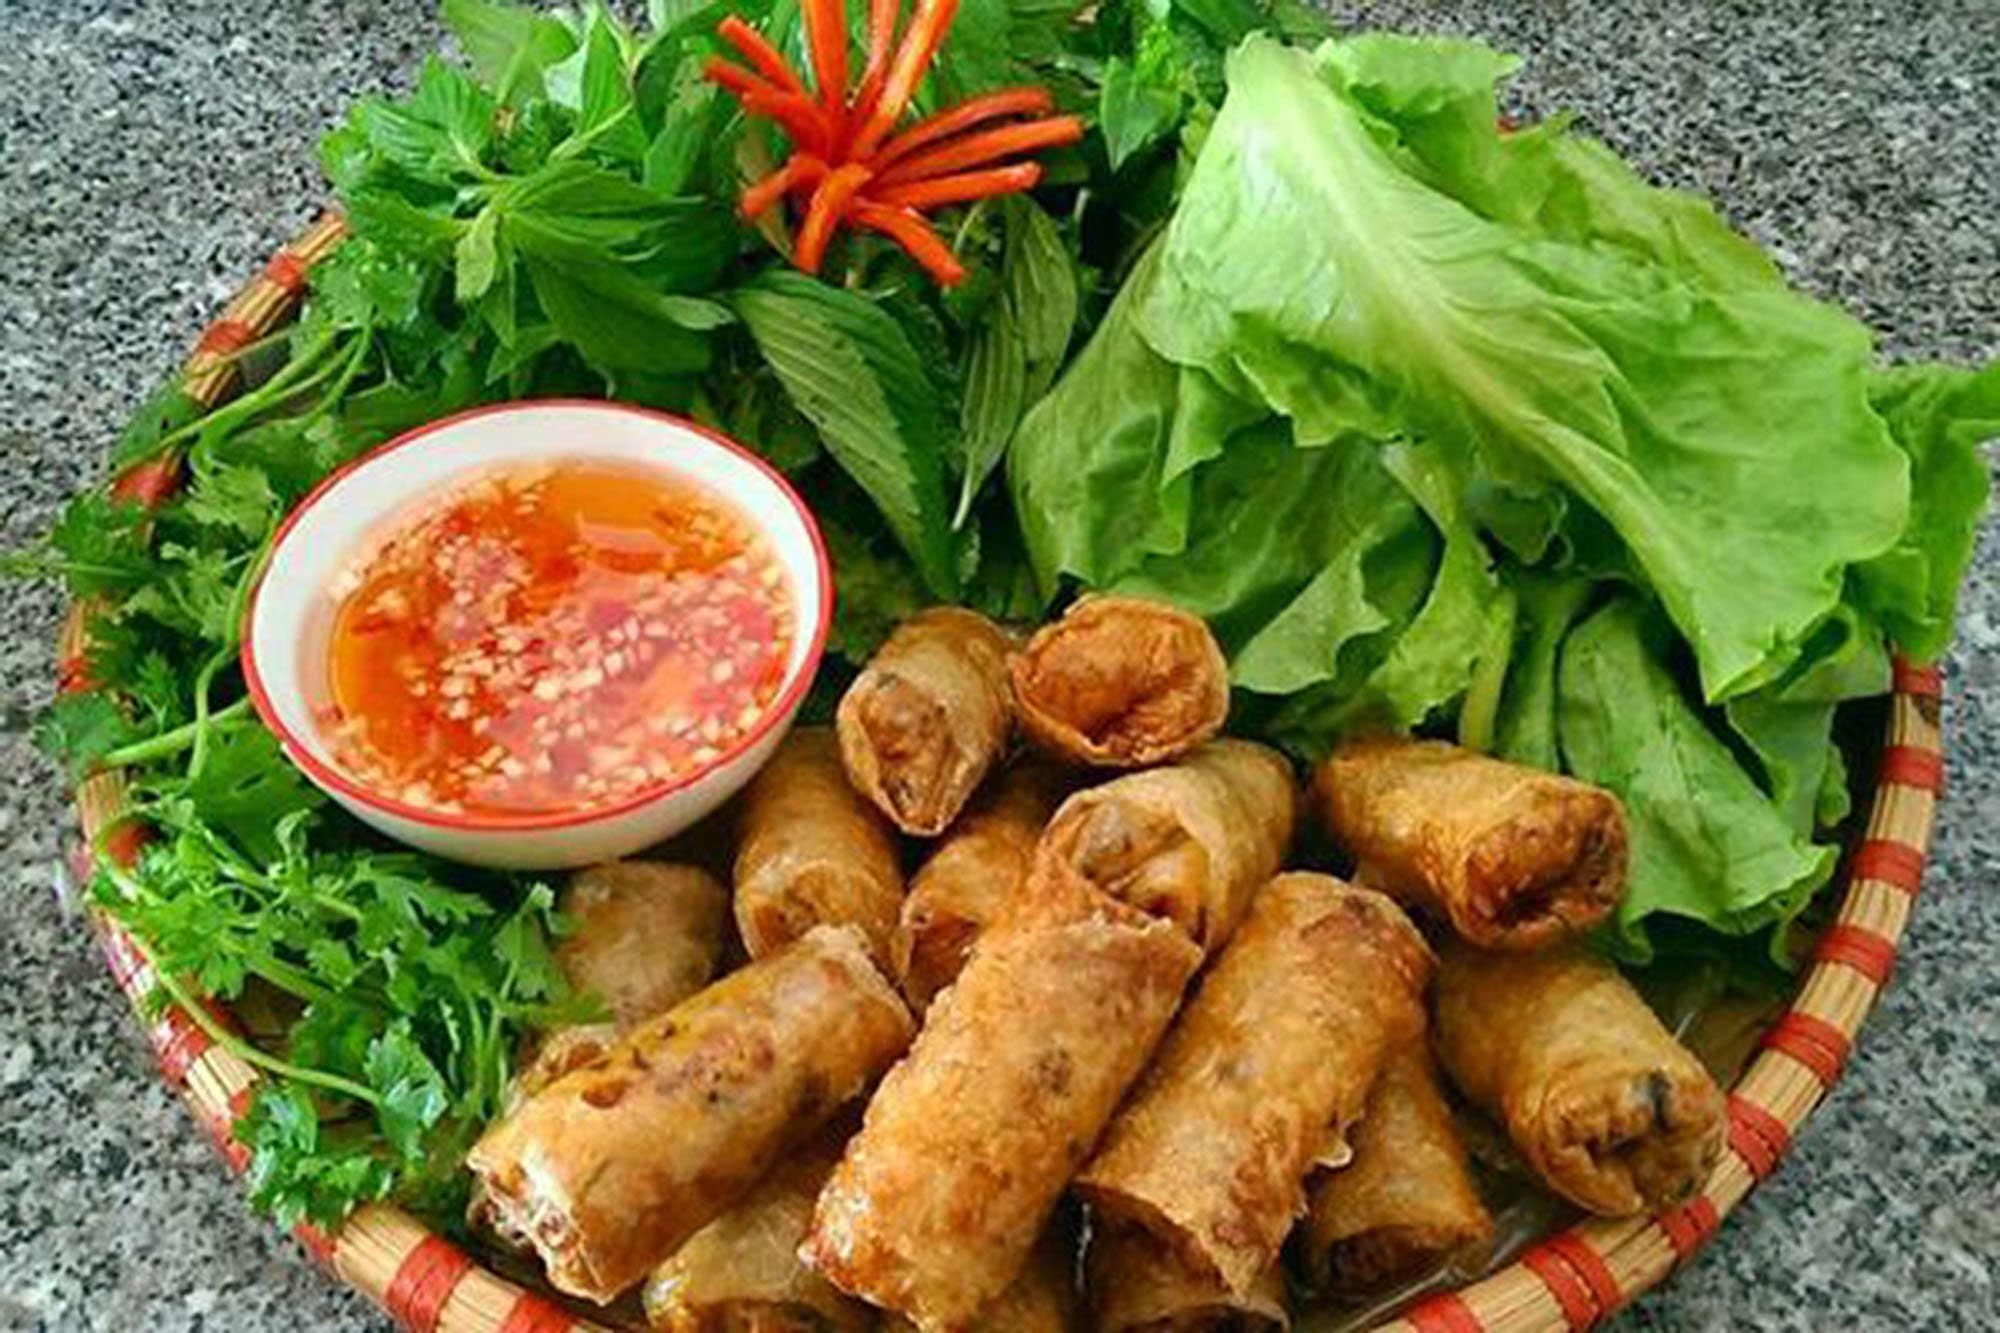 Buy Three Ladies Banh Trang Spring Roll Rice Paper Wrappers Round